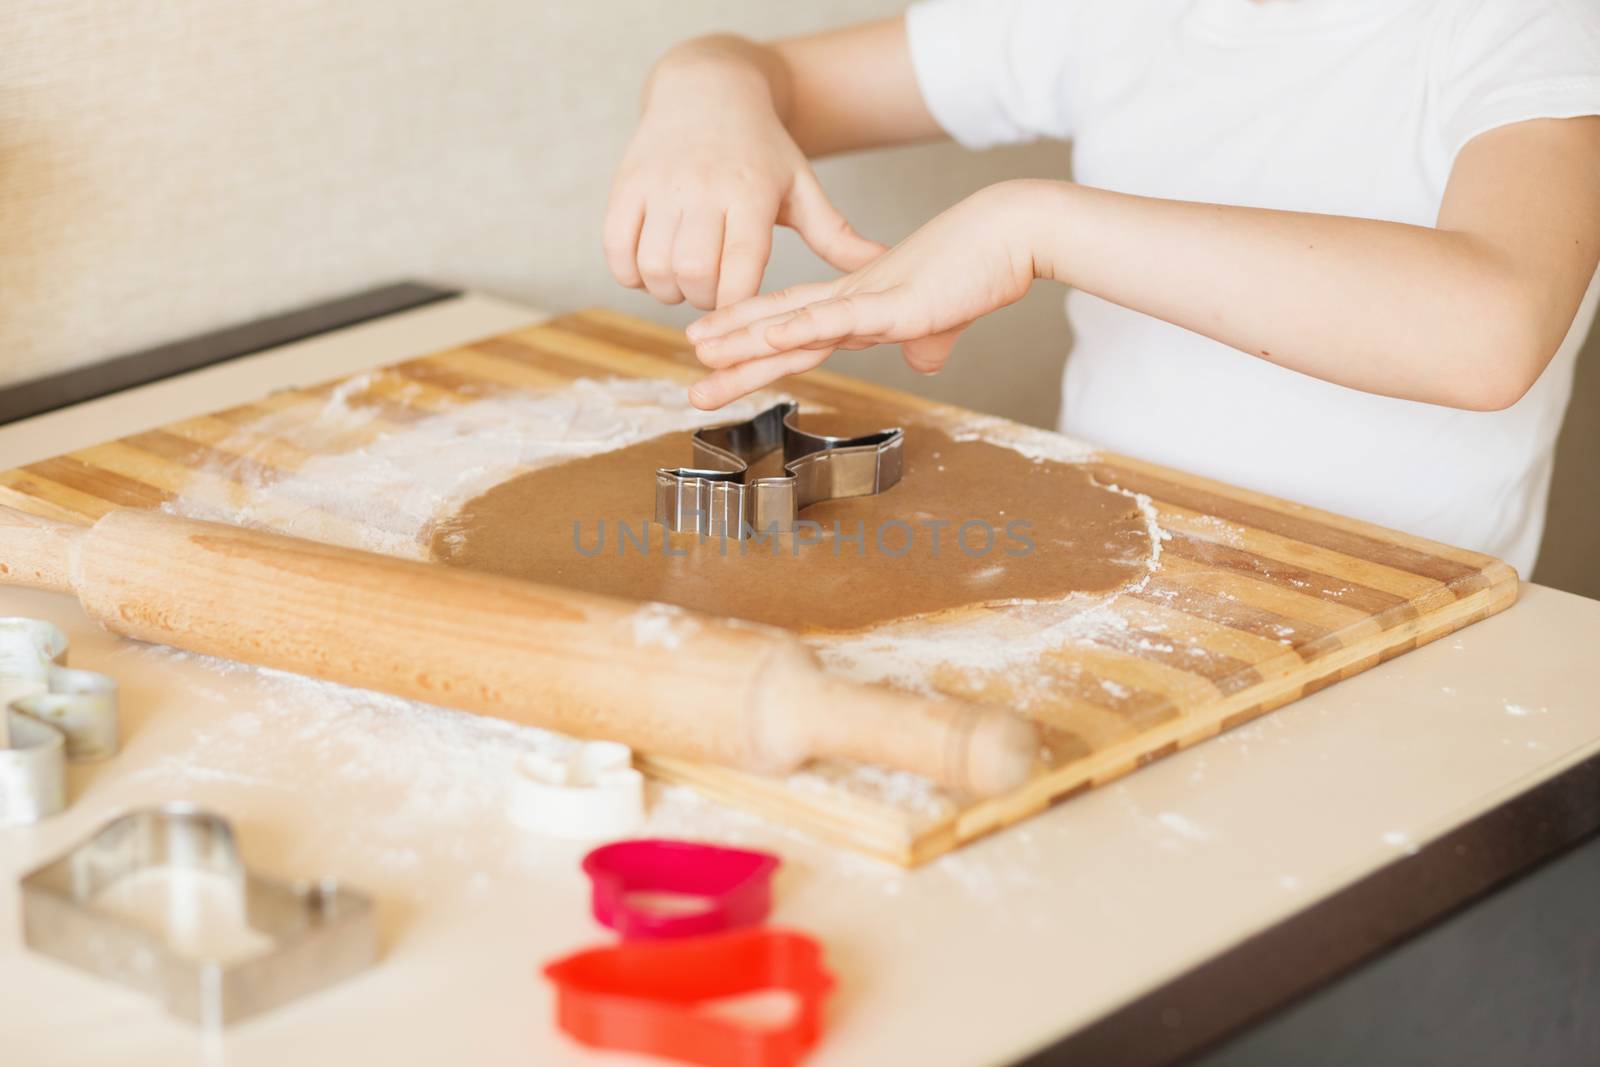 Master class for children on baking christmas cookies. Young chi by natazhekova